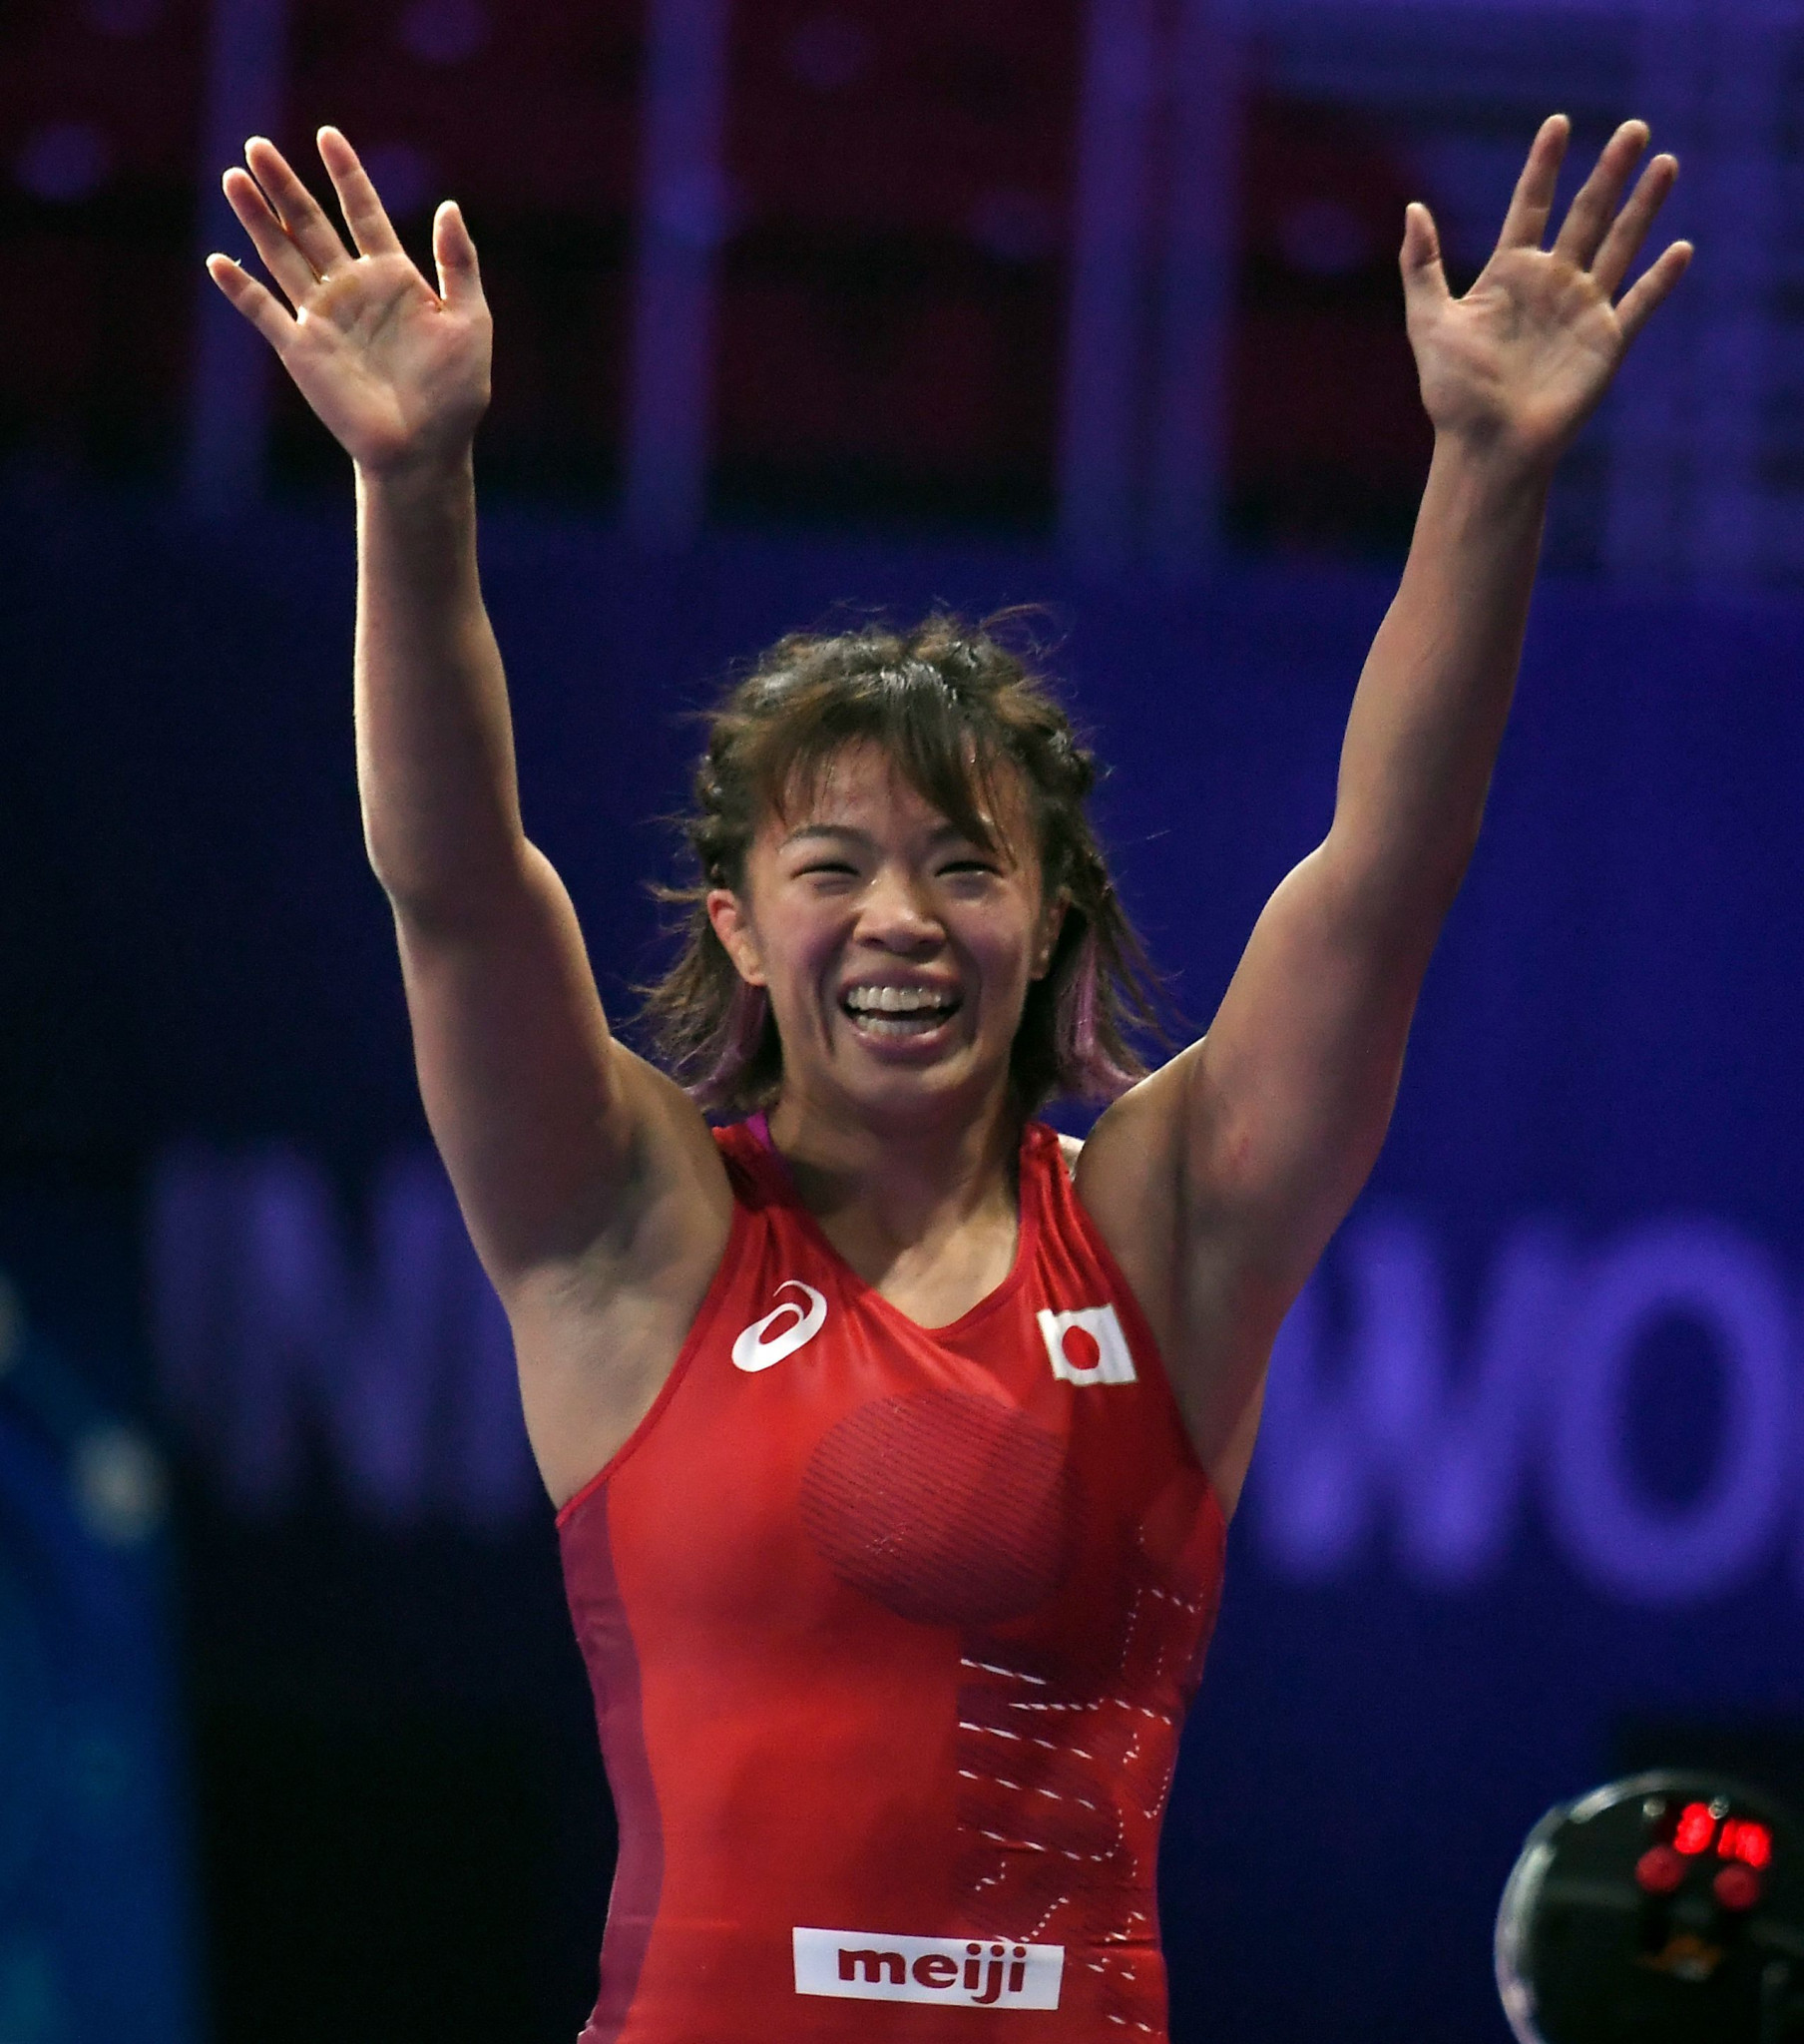 Risako Kawai won Japan's second gold in the 59kg division ©Getty Images